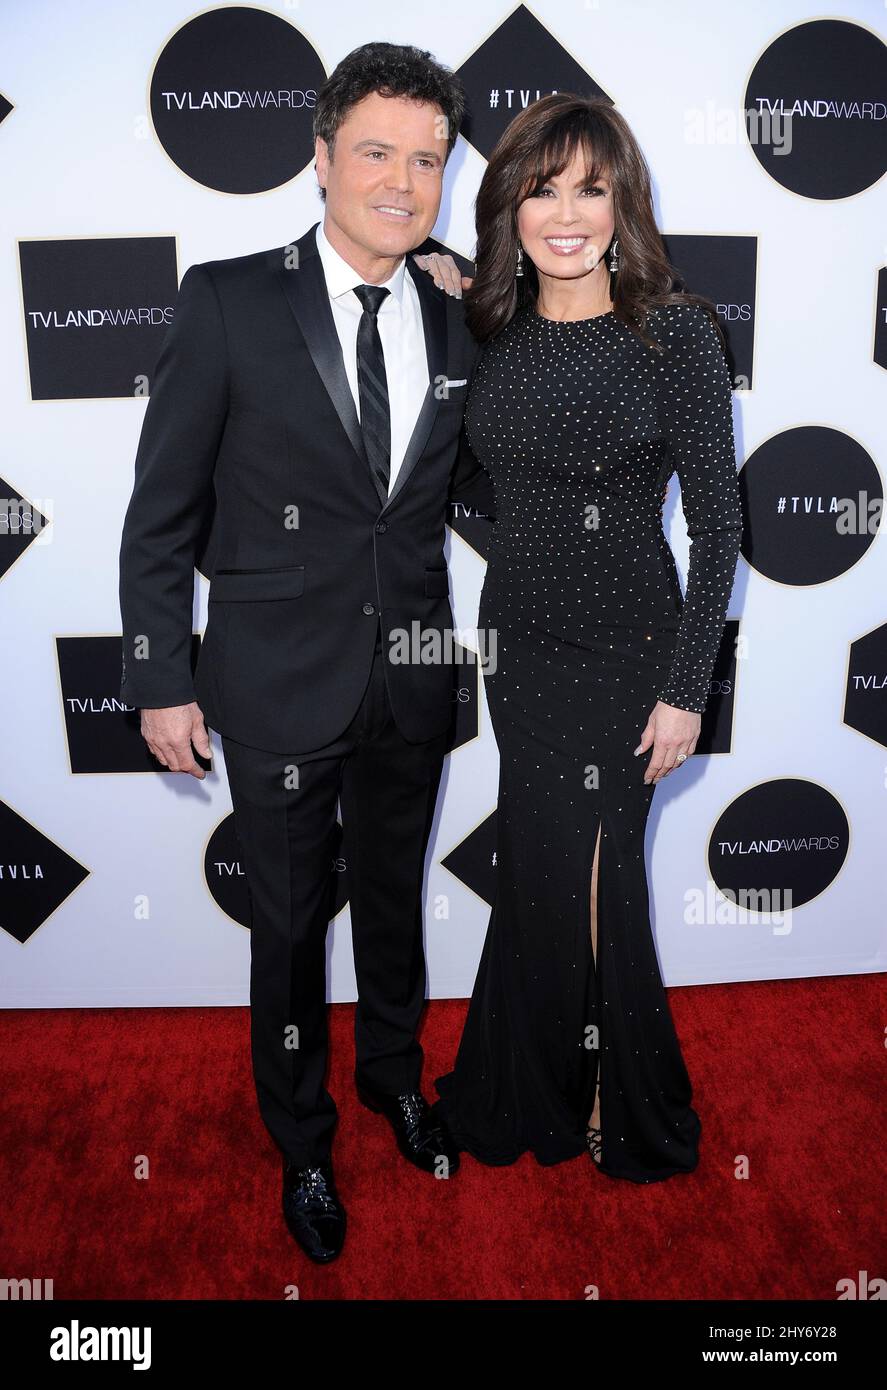 Donny Osmond, Marie Osmond attending 2015 TV LAND Awards - Arrivals held at Saban Theatre in Los Angeles, USA. Stock Photo